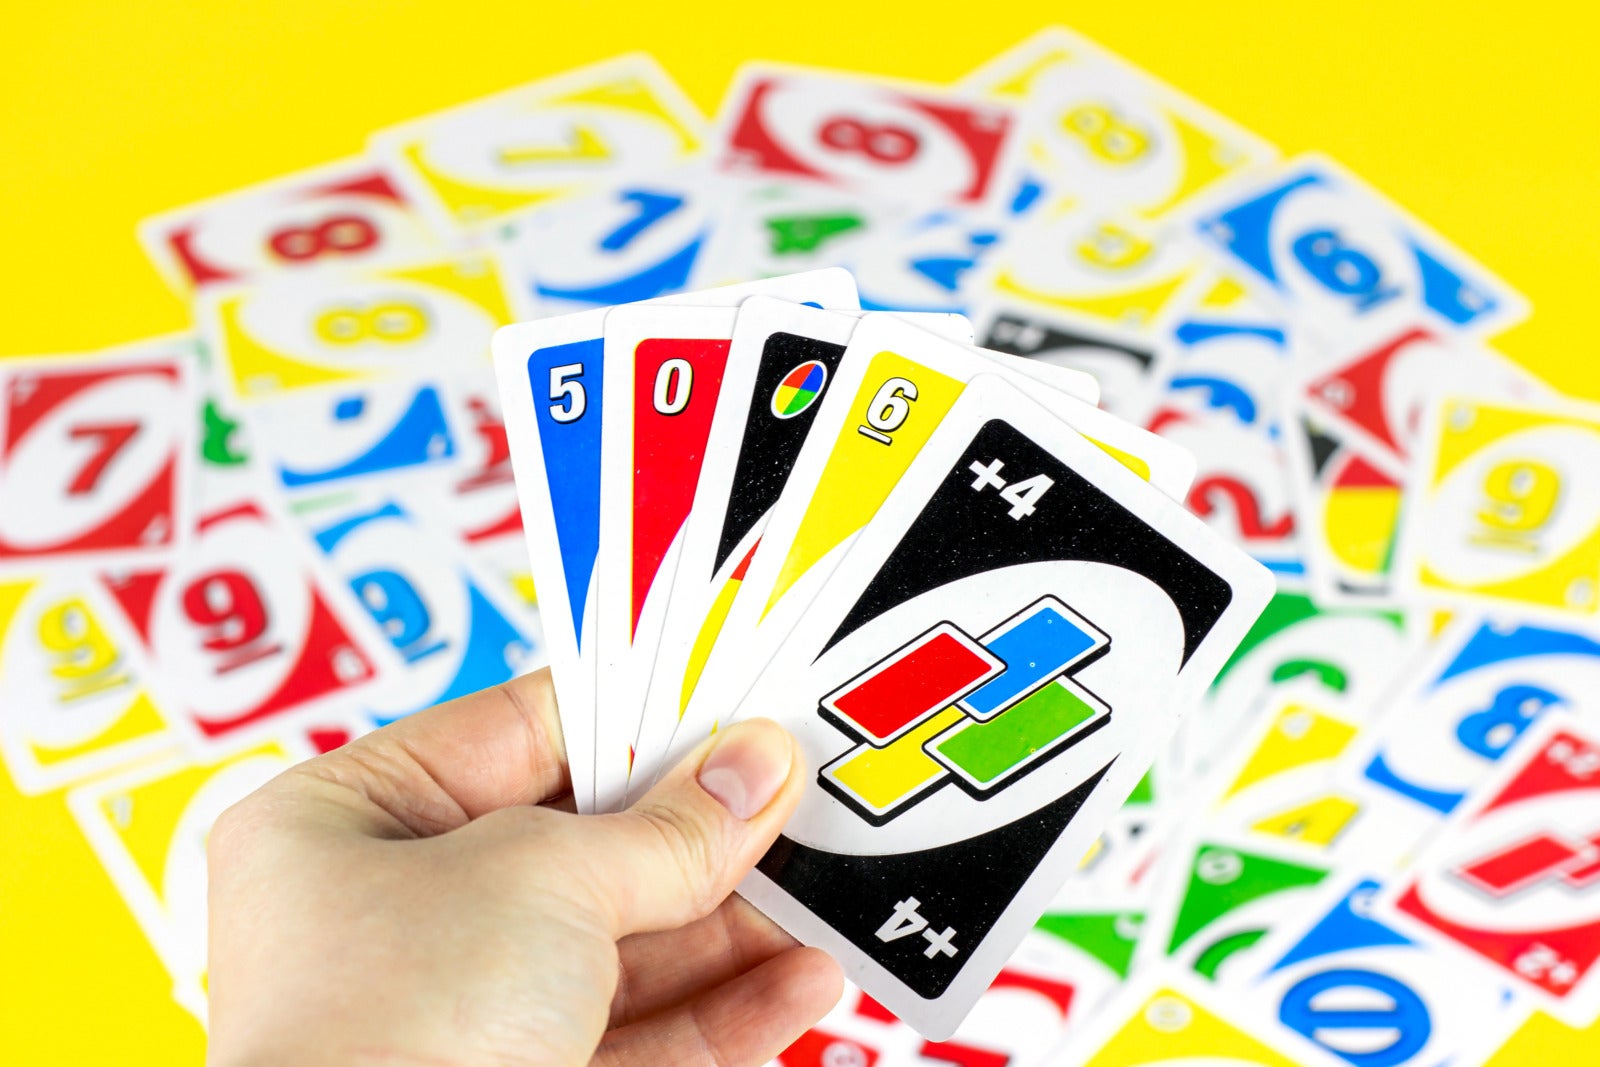 Mattel will hire a Chief UNO Player to introduce a new game. Is it